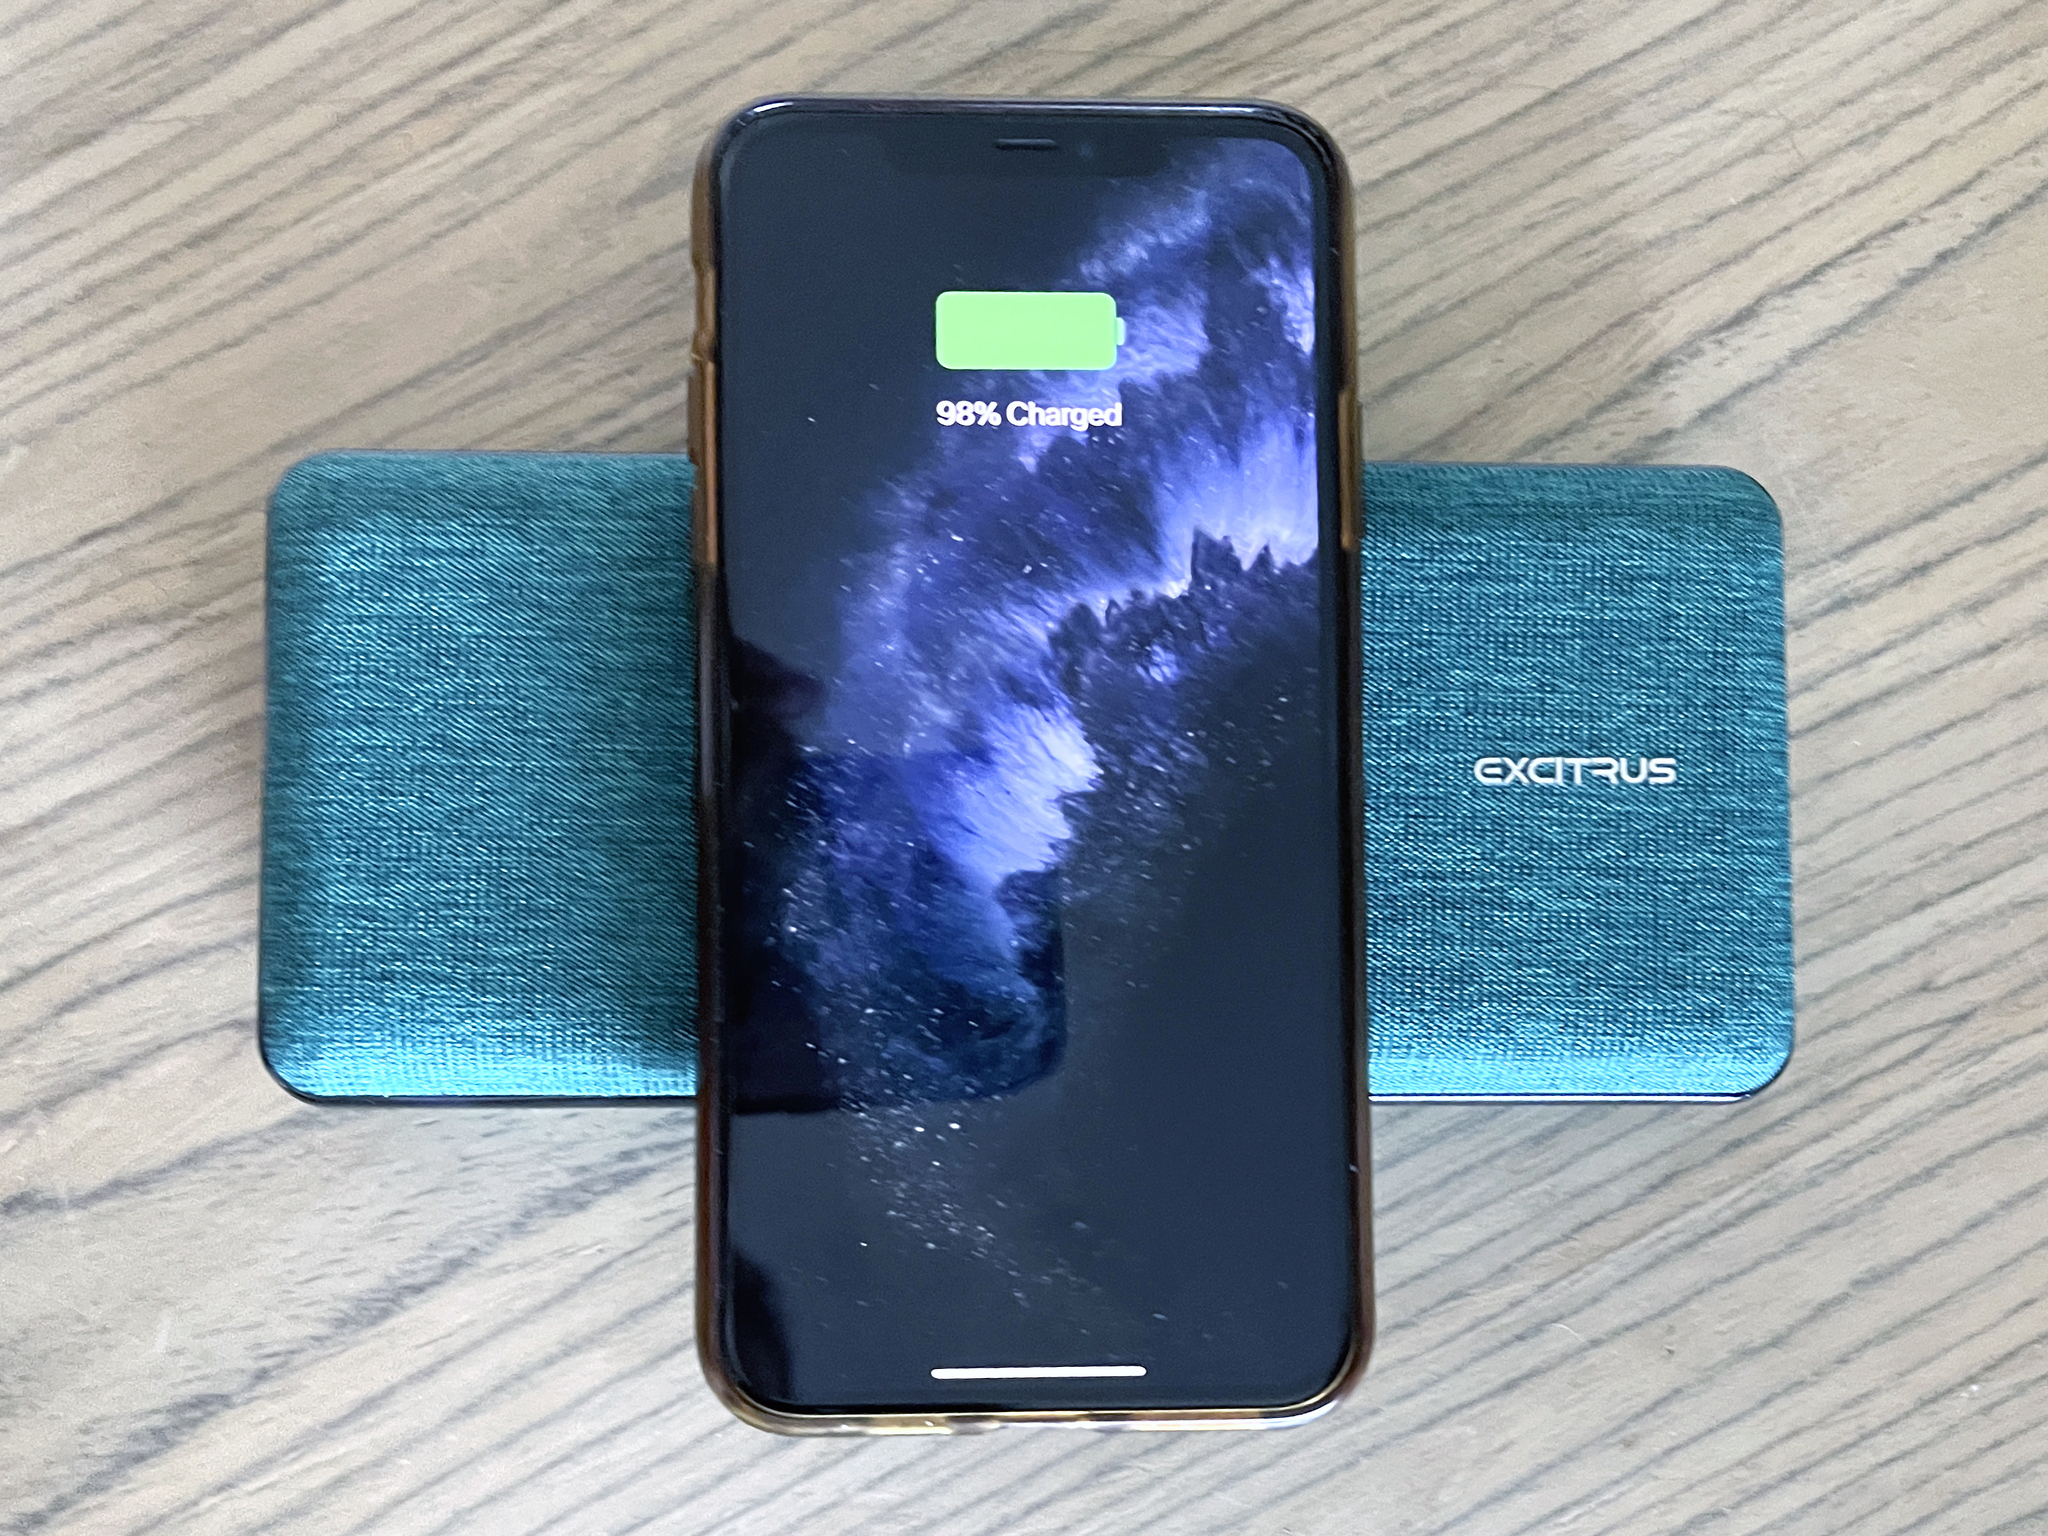 Excitrus portable charger